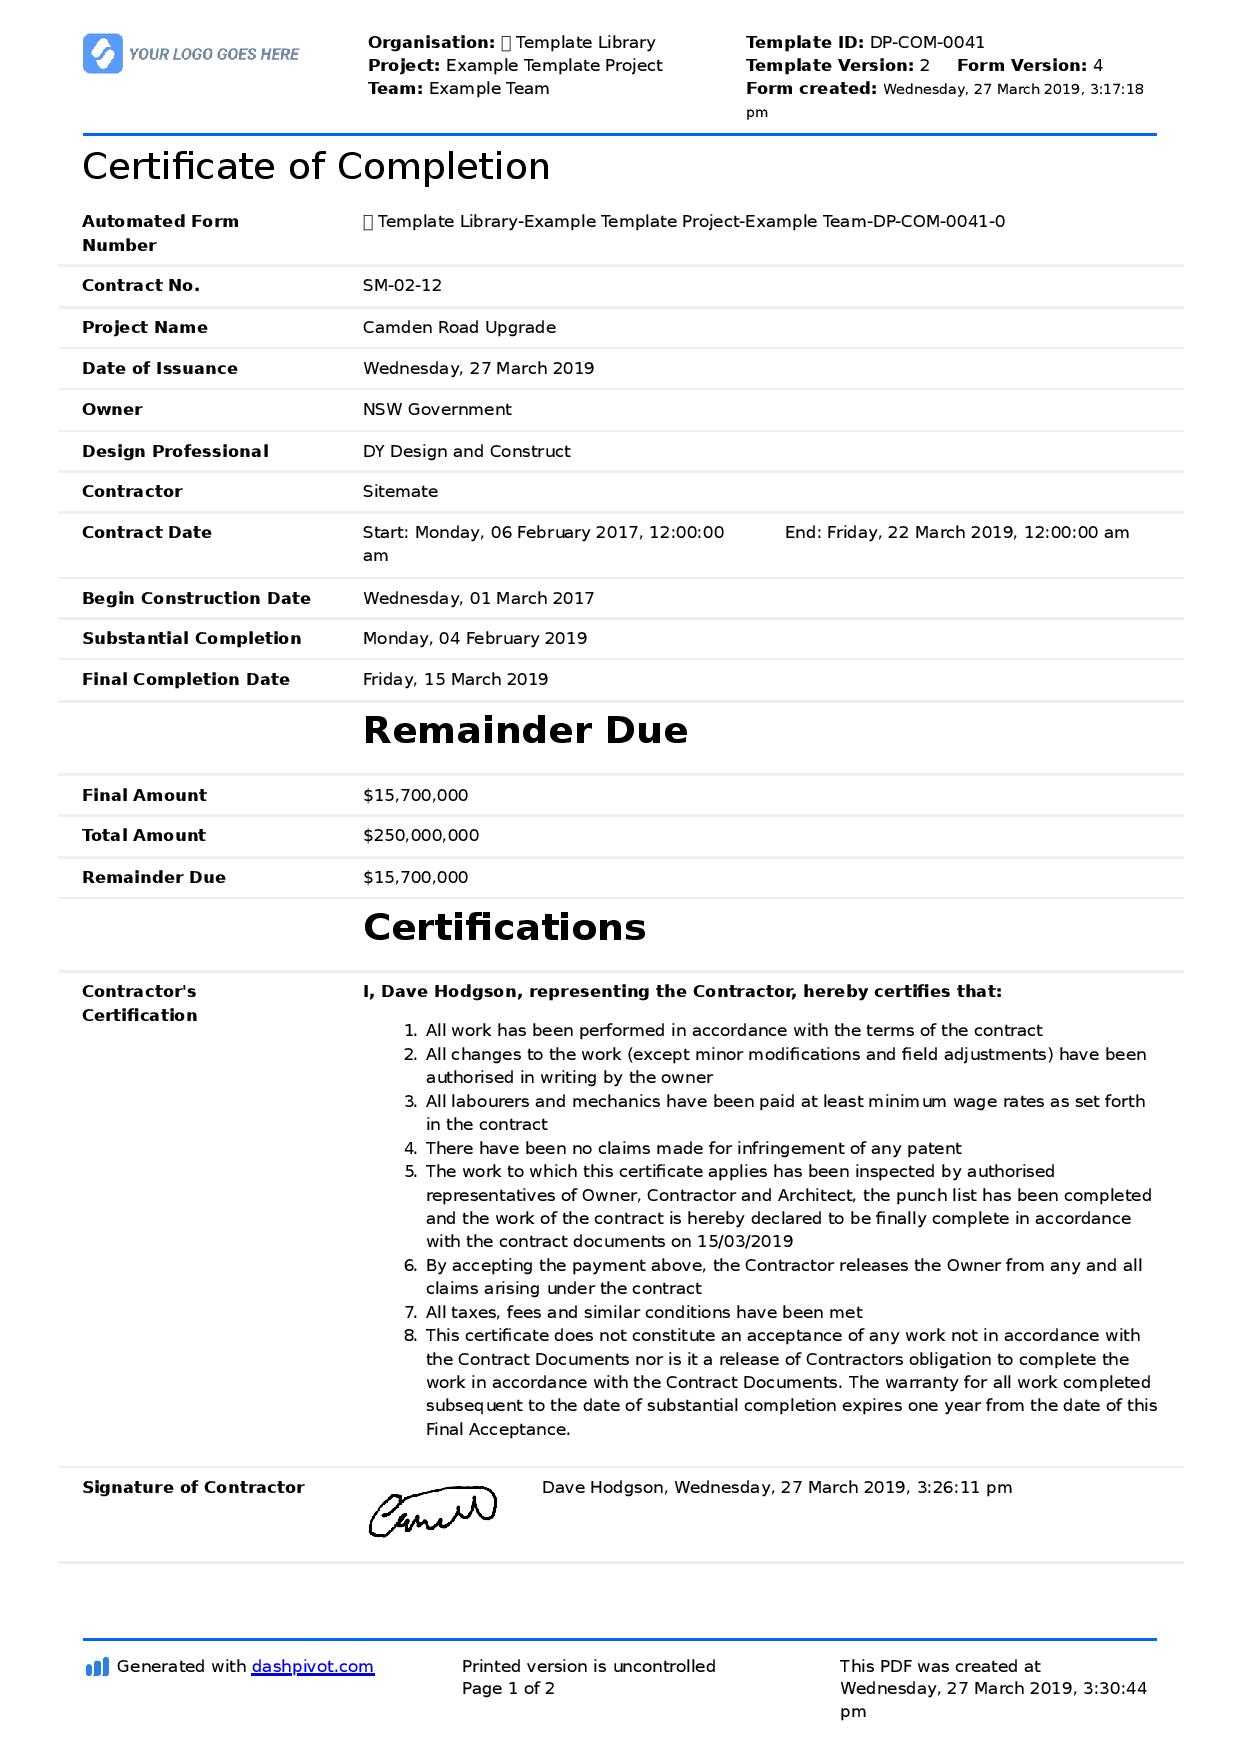 Certificate Of Completion For Construction (Free Template + Intended For Certificate Of Completion Construction Templates